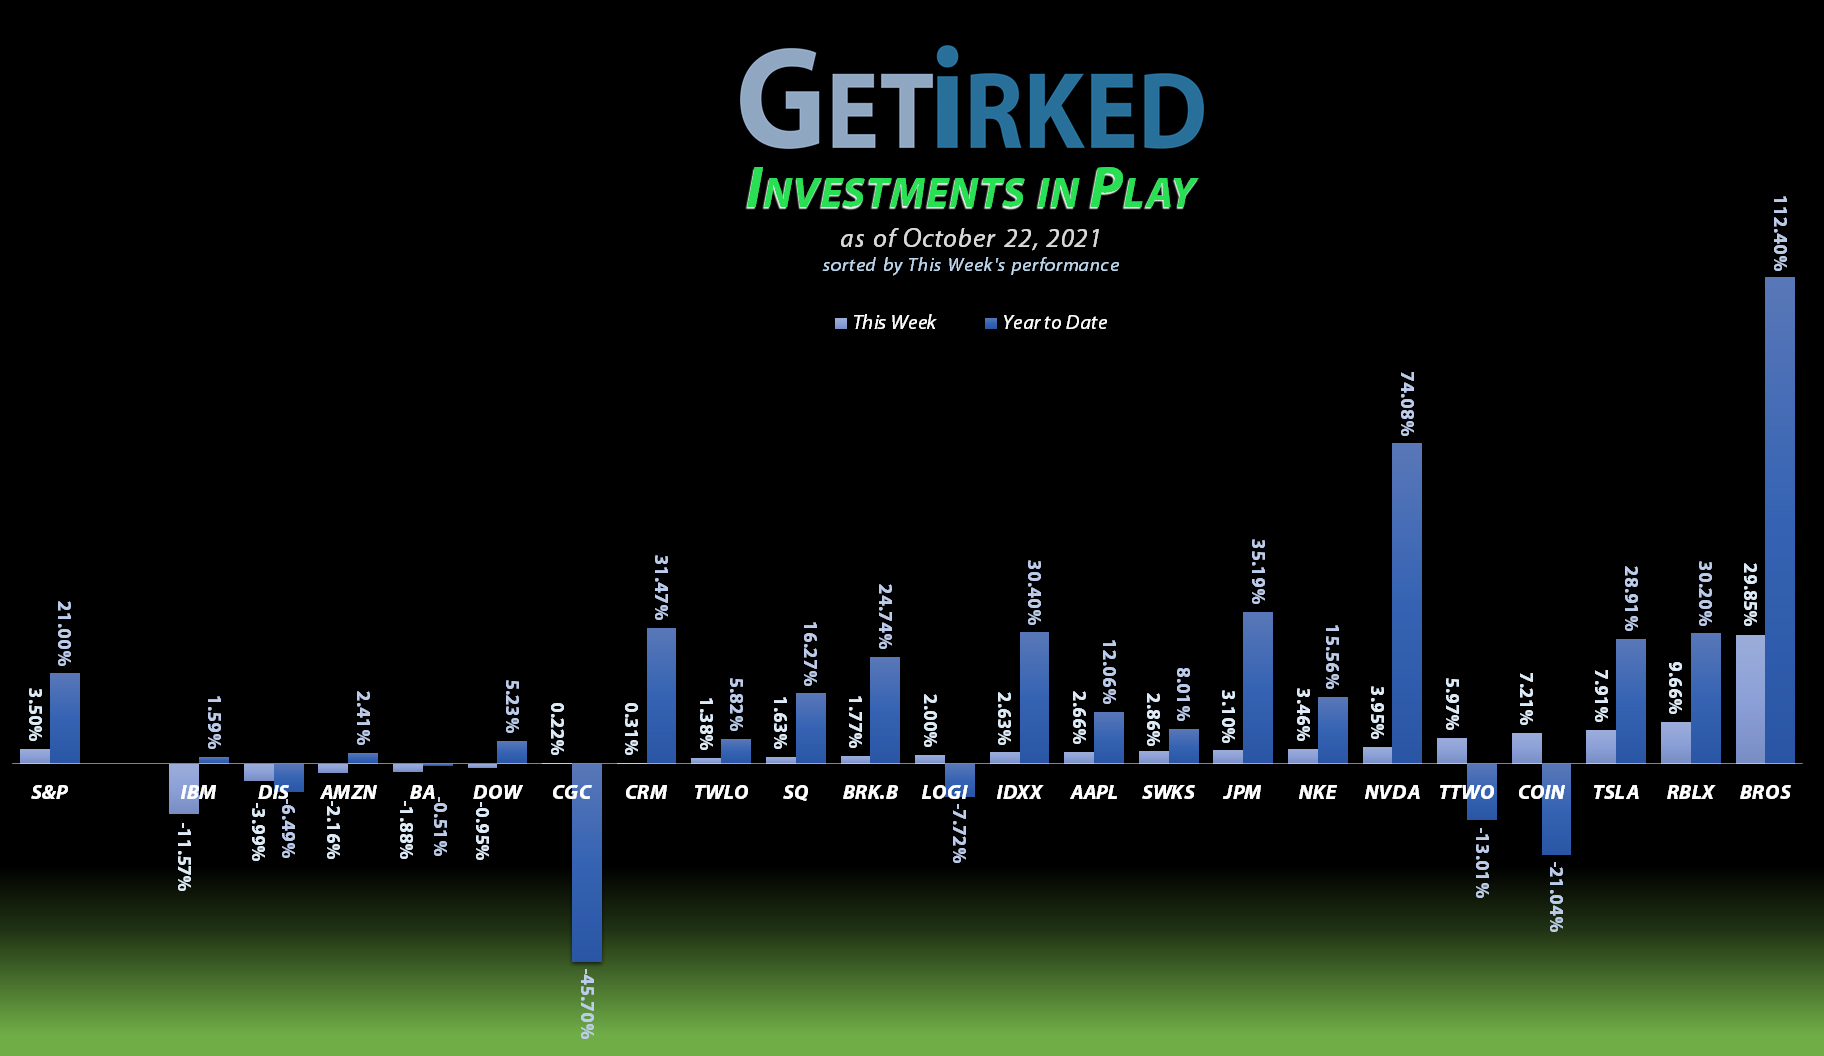 Get Irked - Investments in Play - October 22, 2021